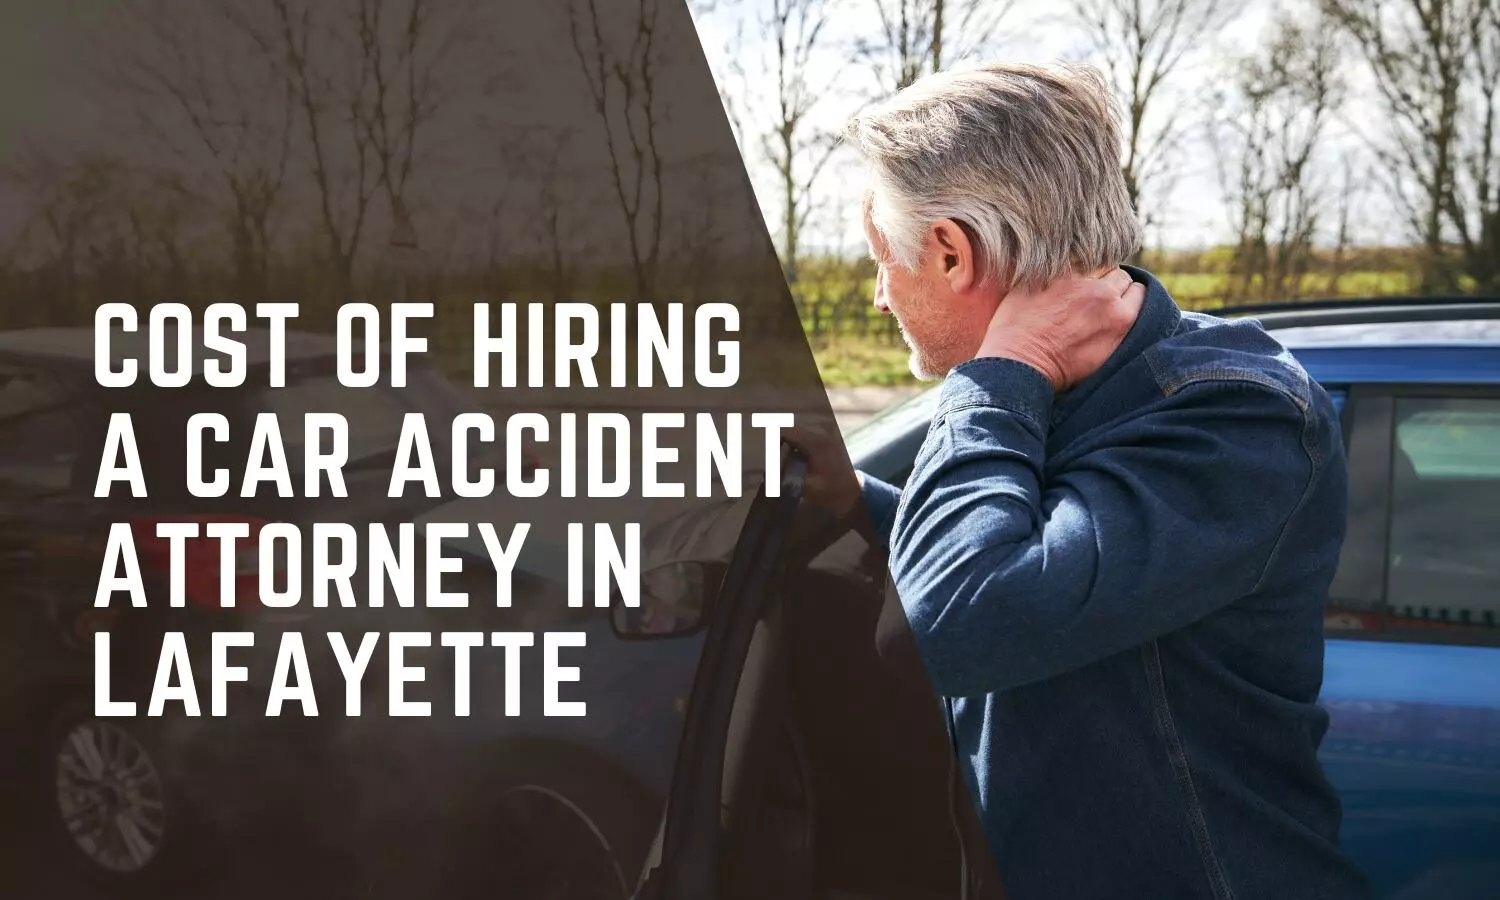 What is the Cost of Hiring a Car Accident Attorney in Lafayette